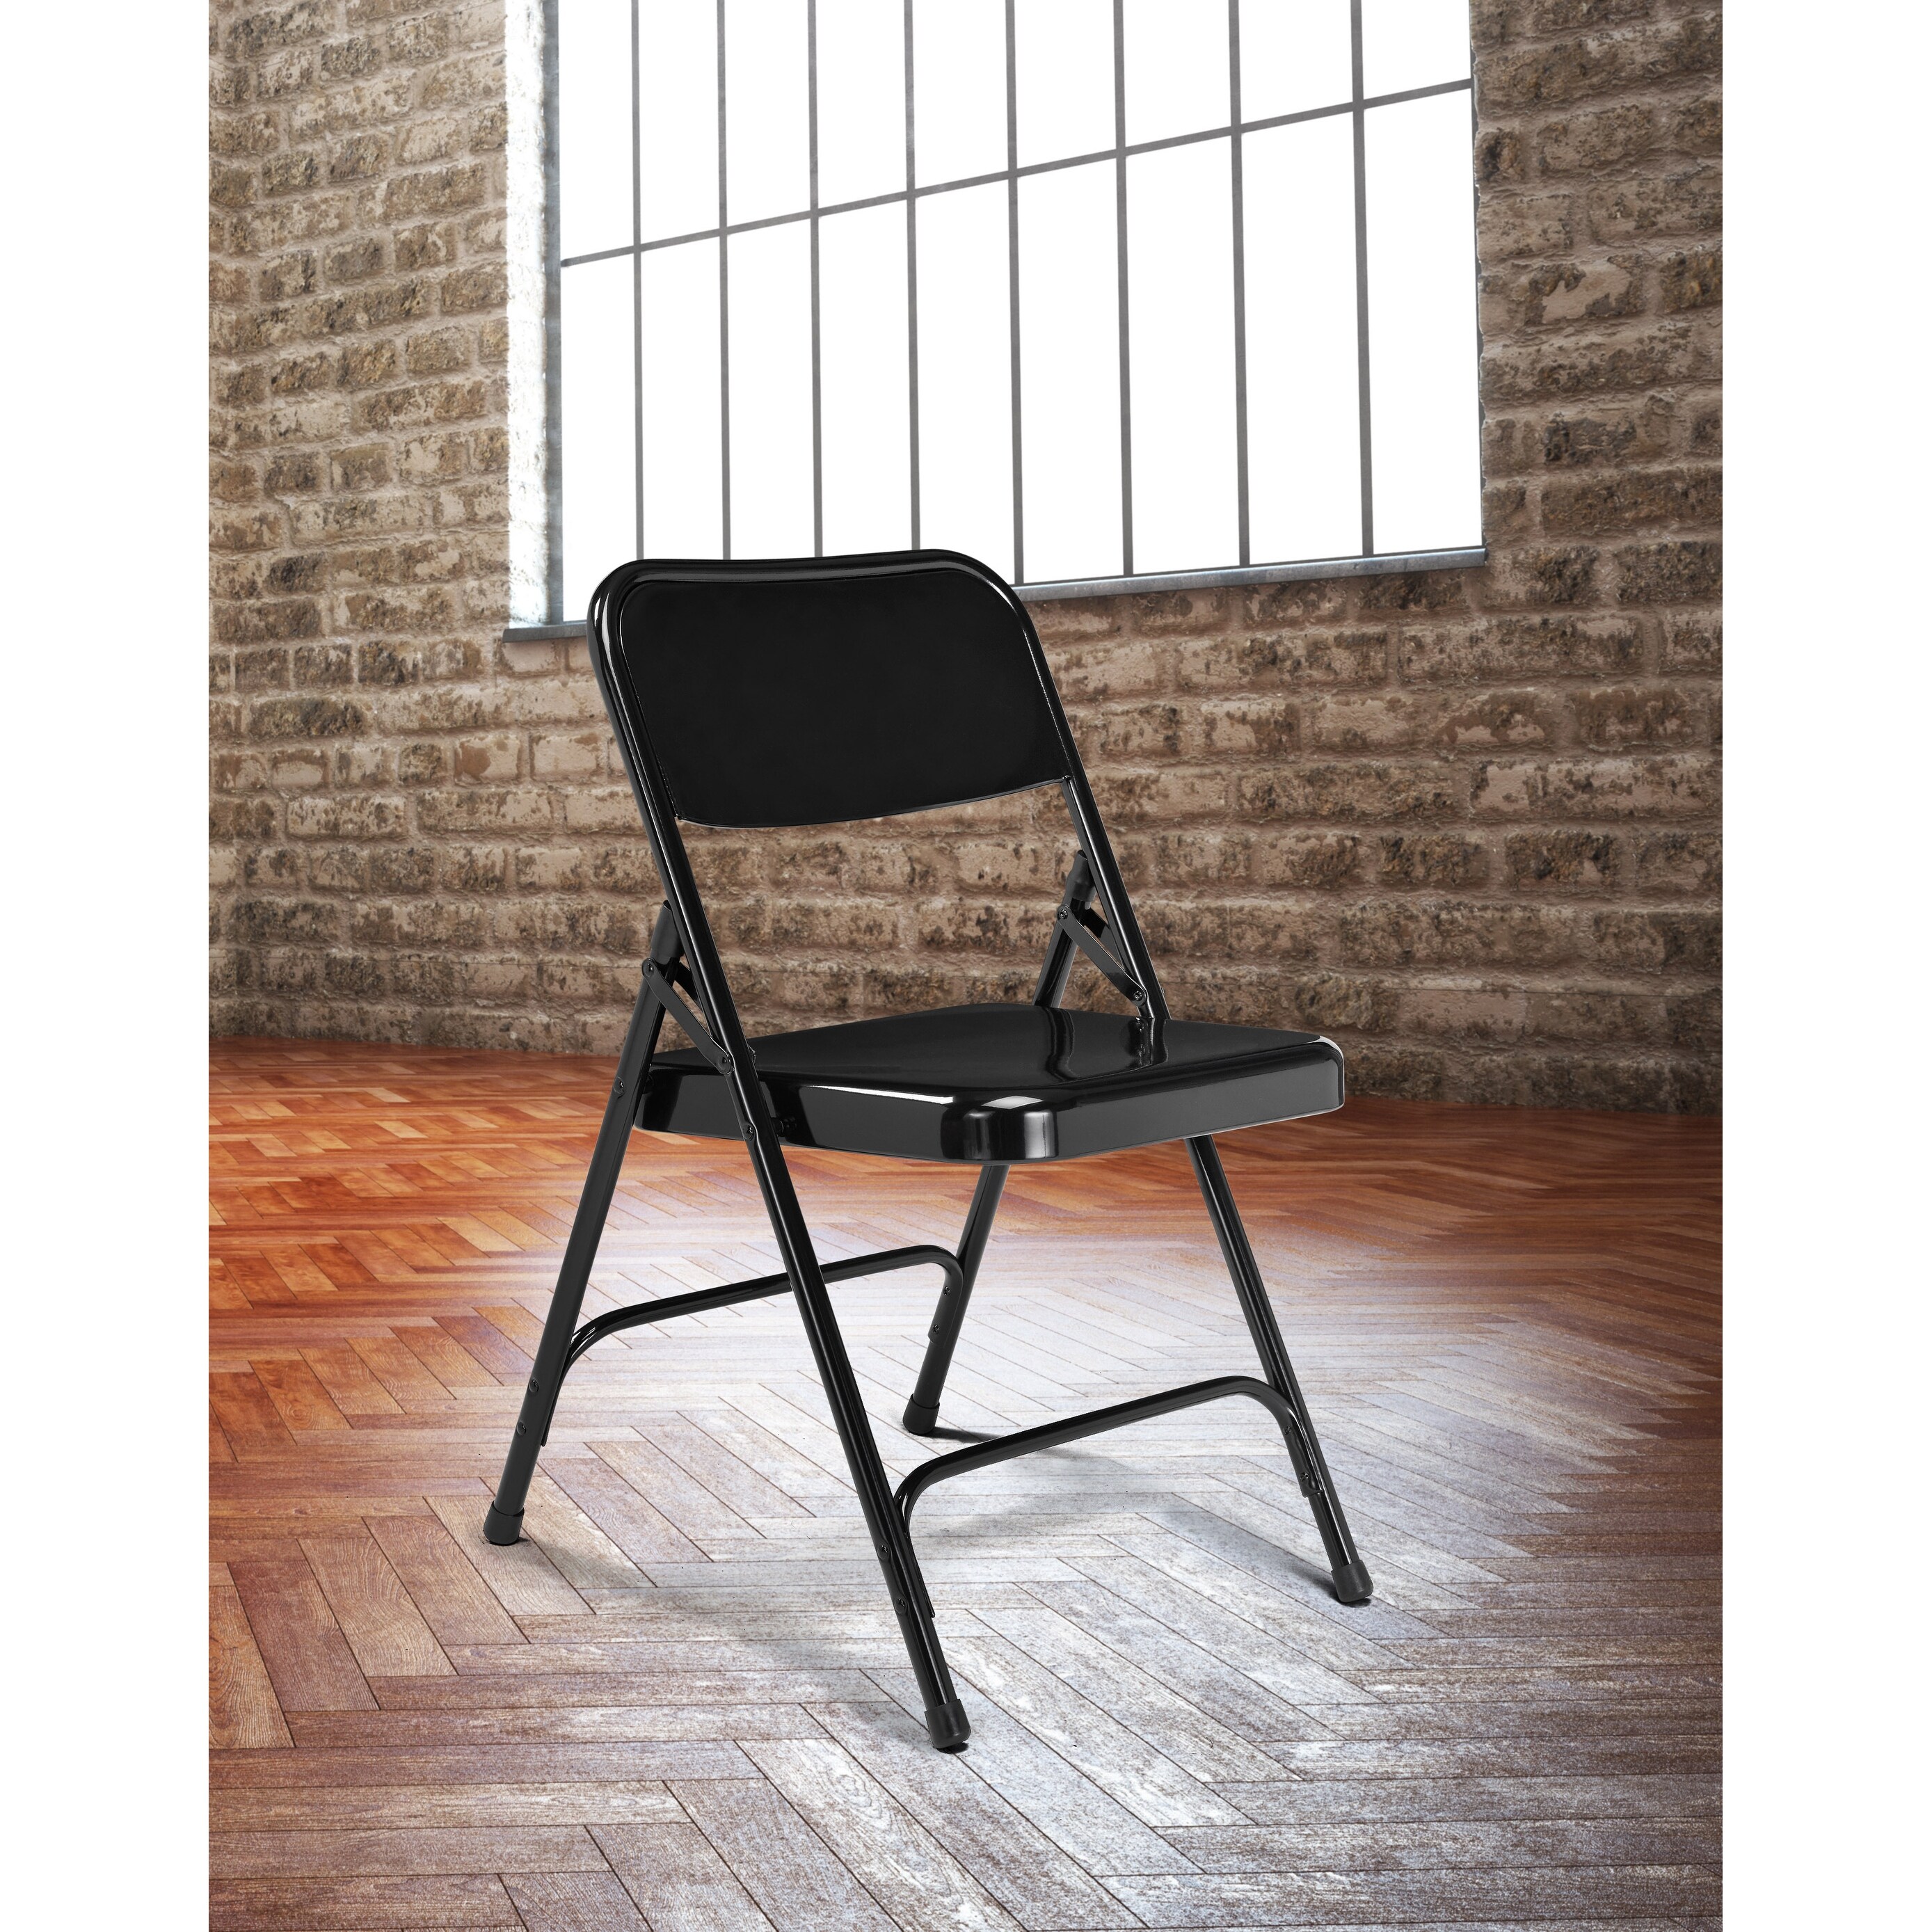 Carton of 4 National Public Seating 200 Series All Steel Premium Folding Chair with Double Brace Char-Blue 480 lbs Capacity 